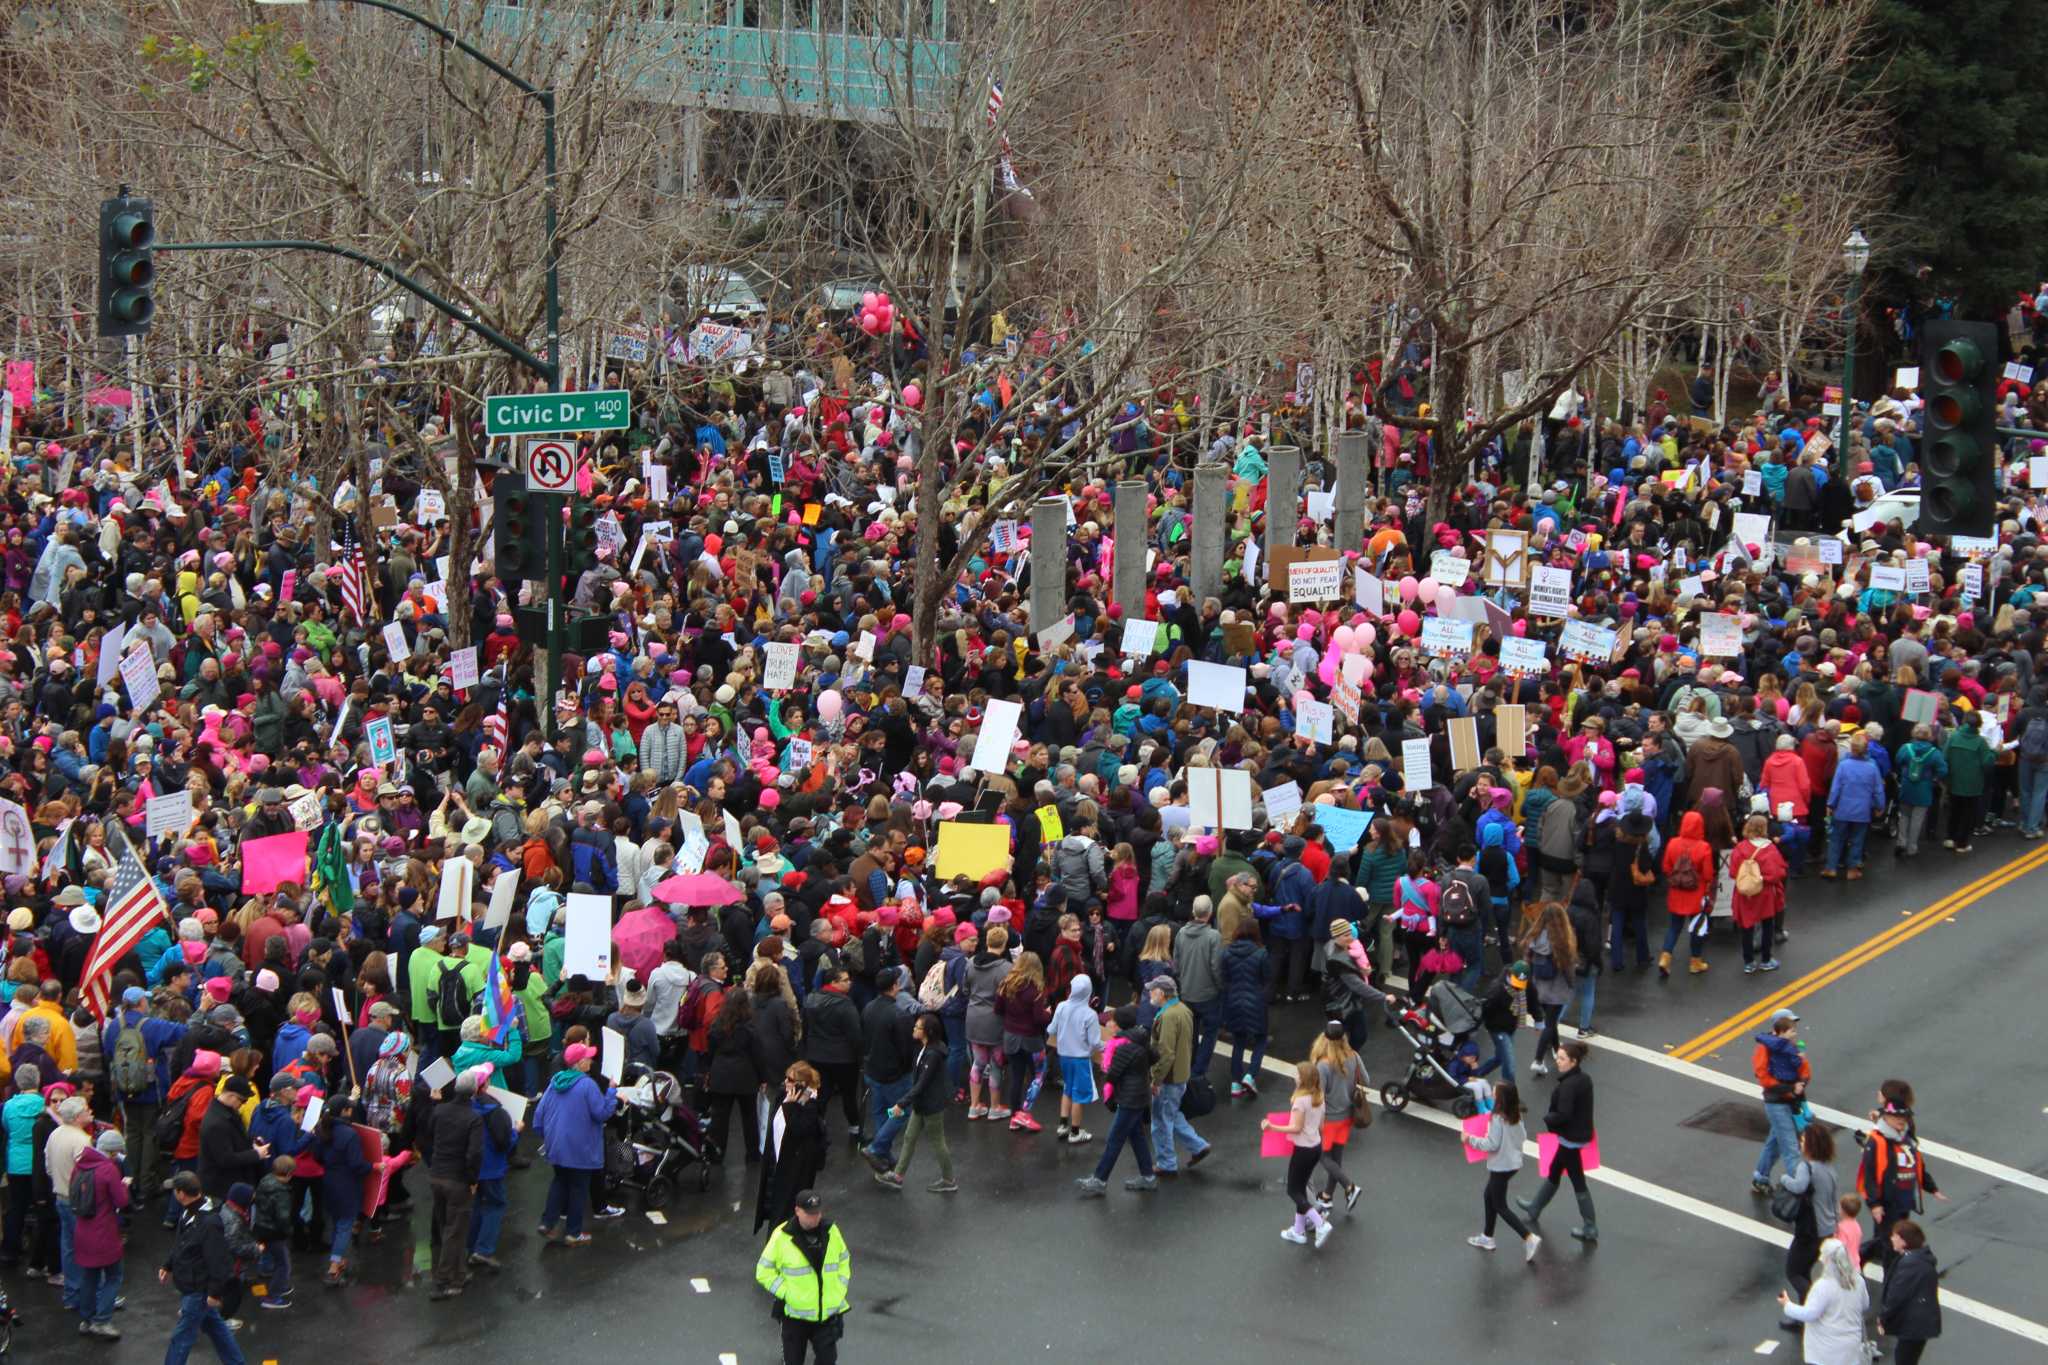 Thousands+gather+for+Womens+March+across+the+Bay+Area